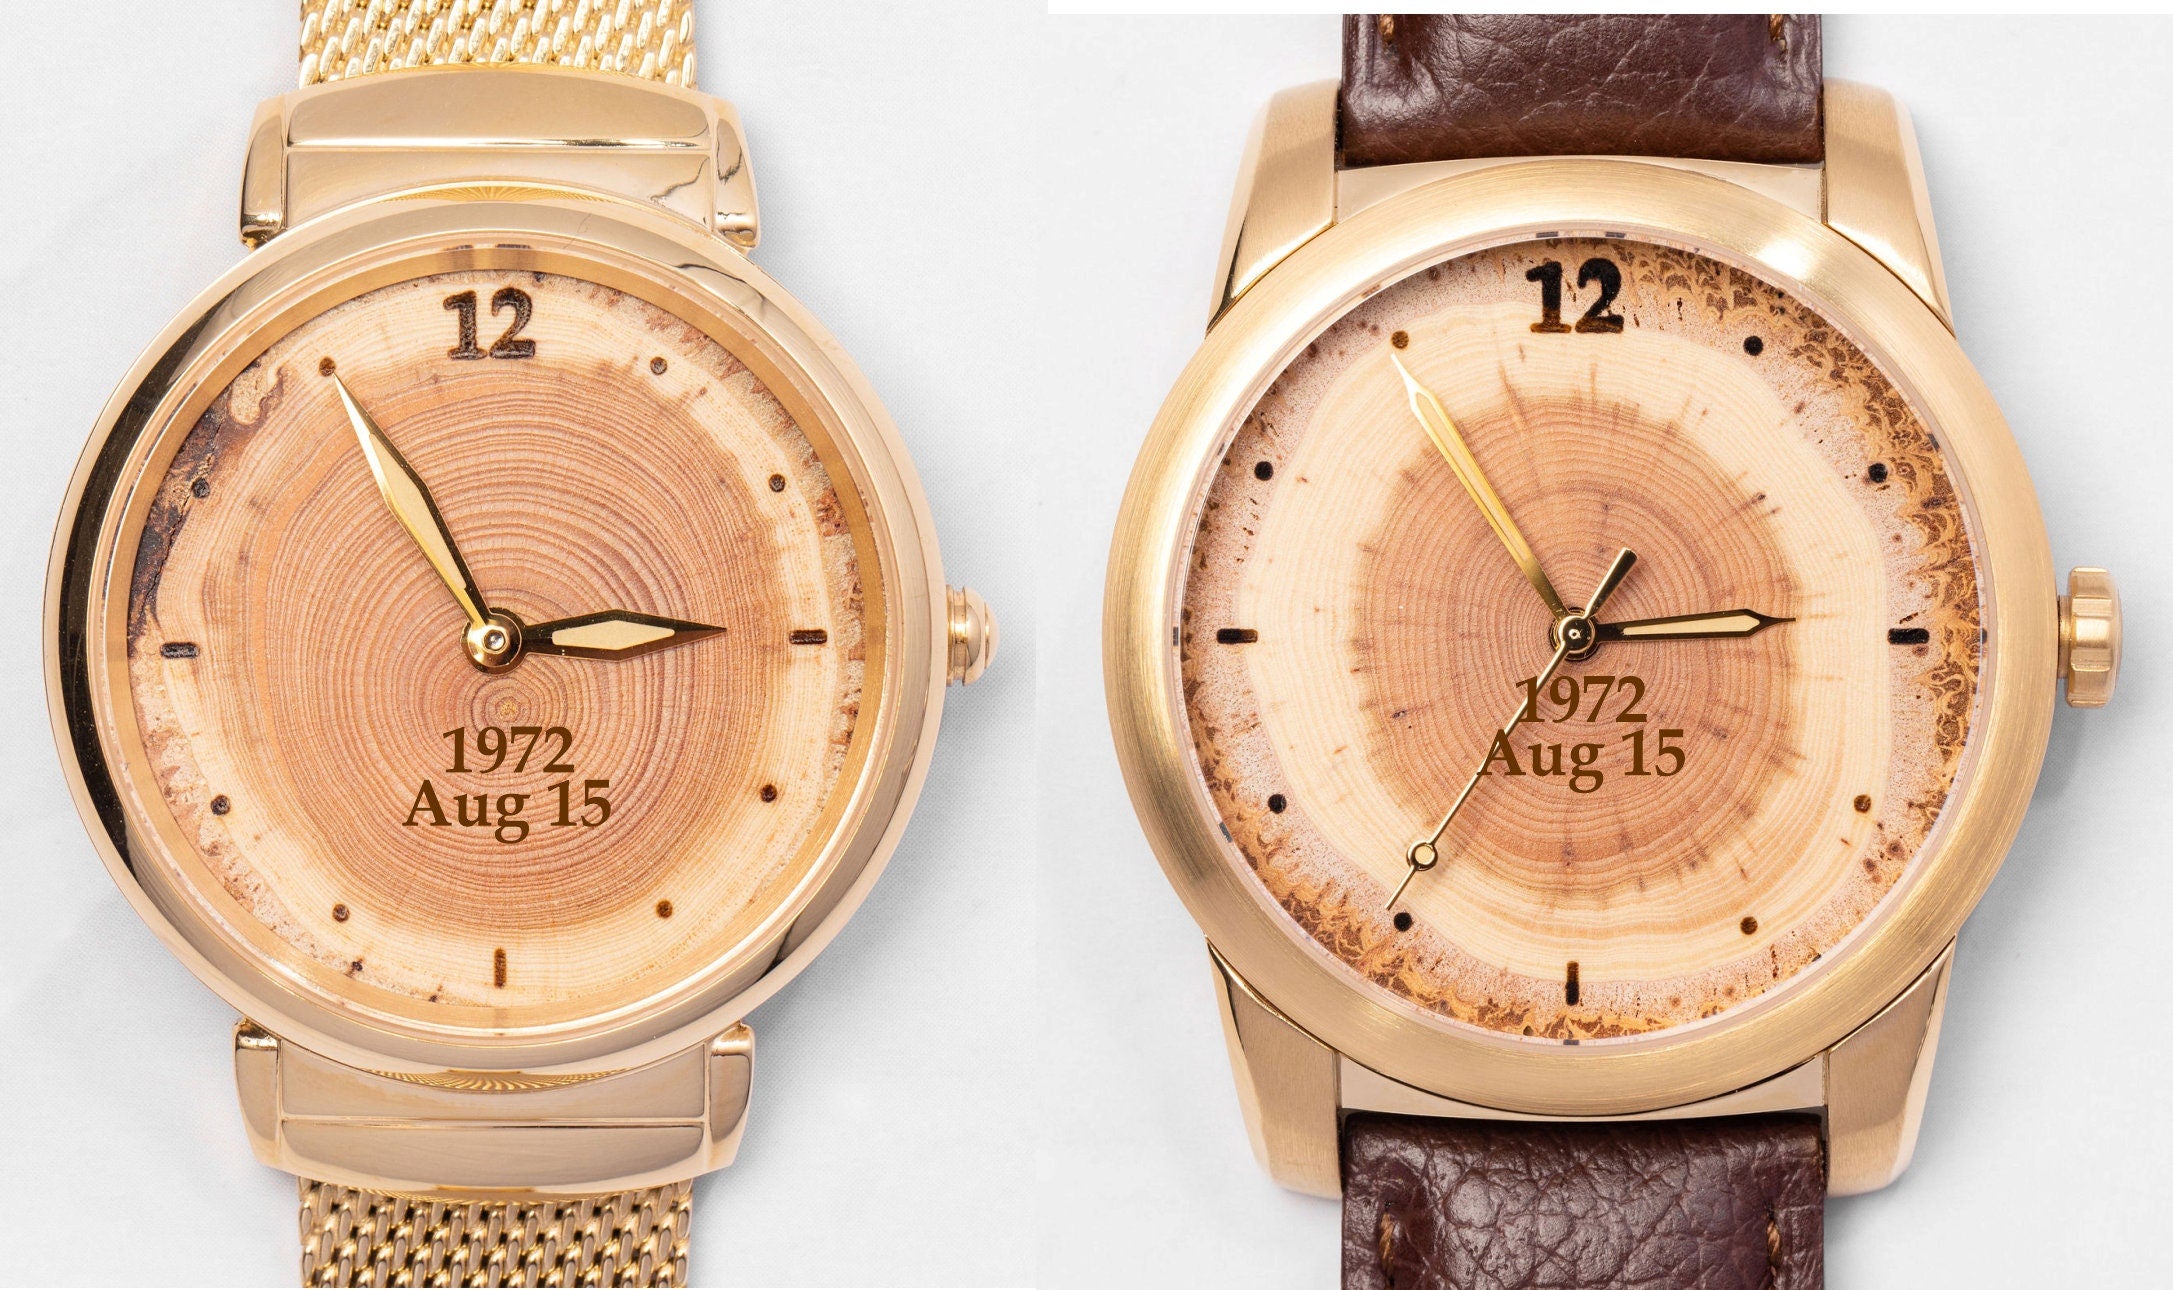 His and Her Golden Anniversary Gift Watch, 50th, Anniversary for Parents